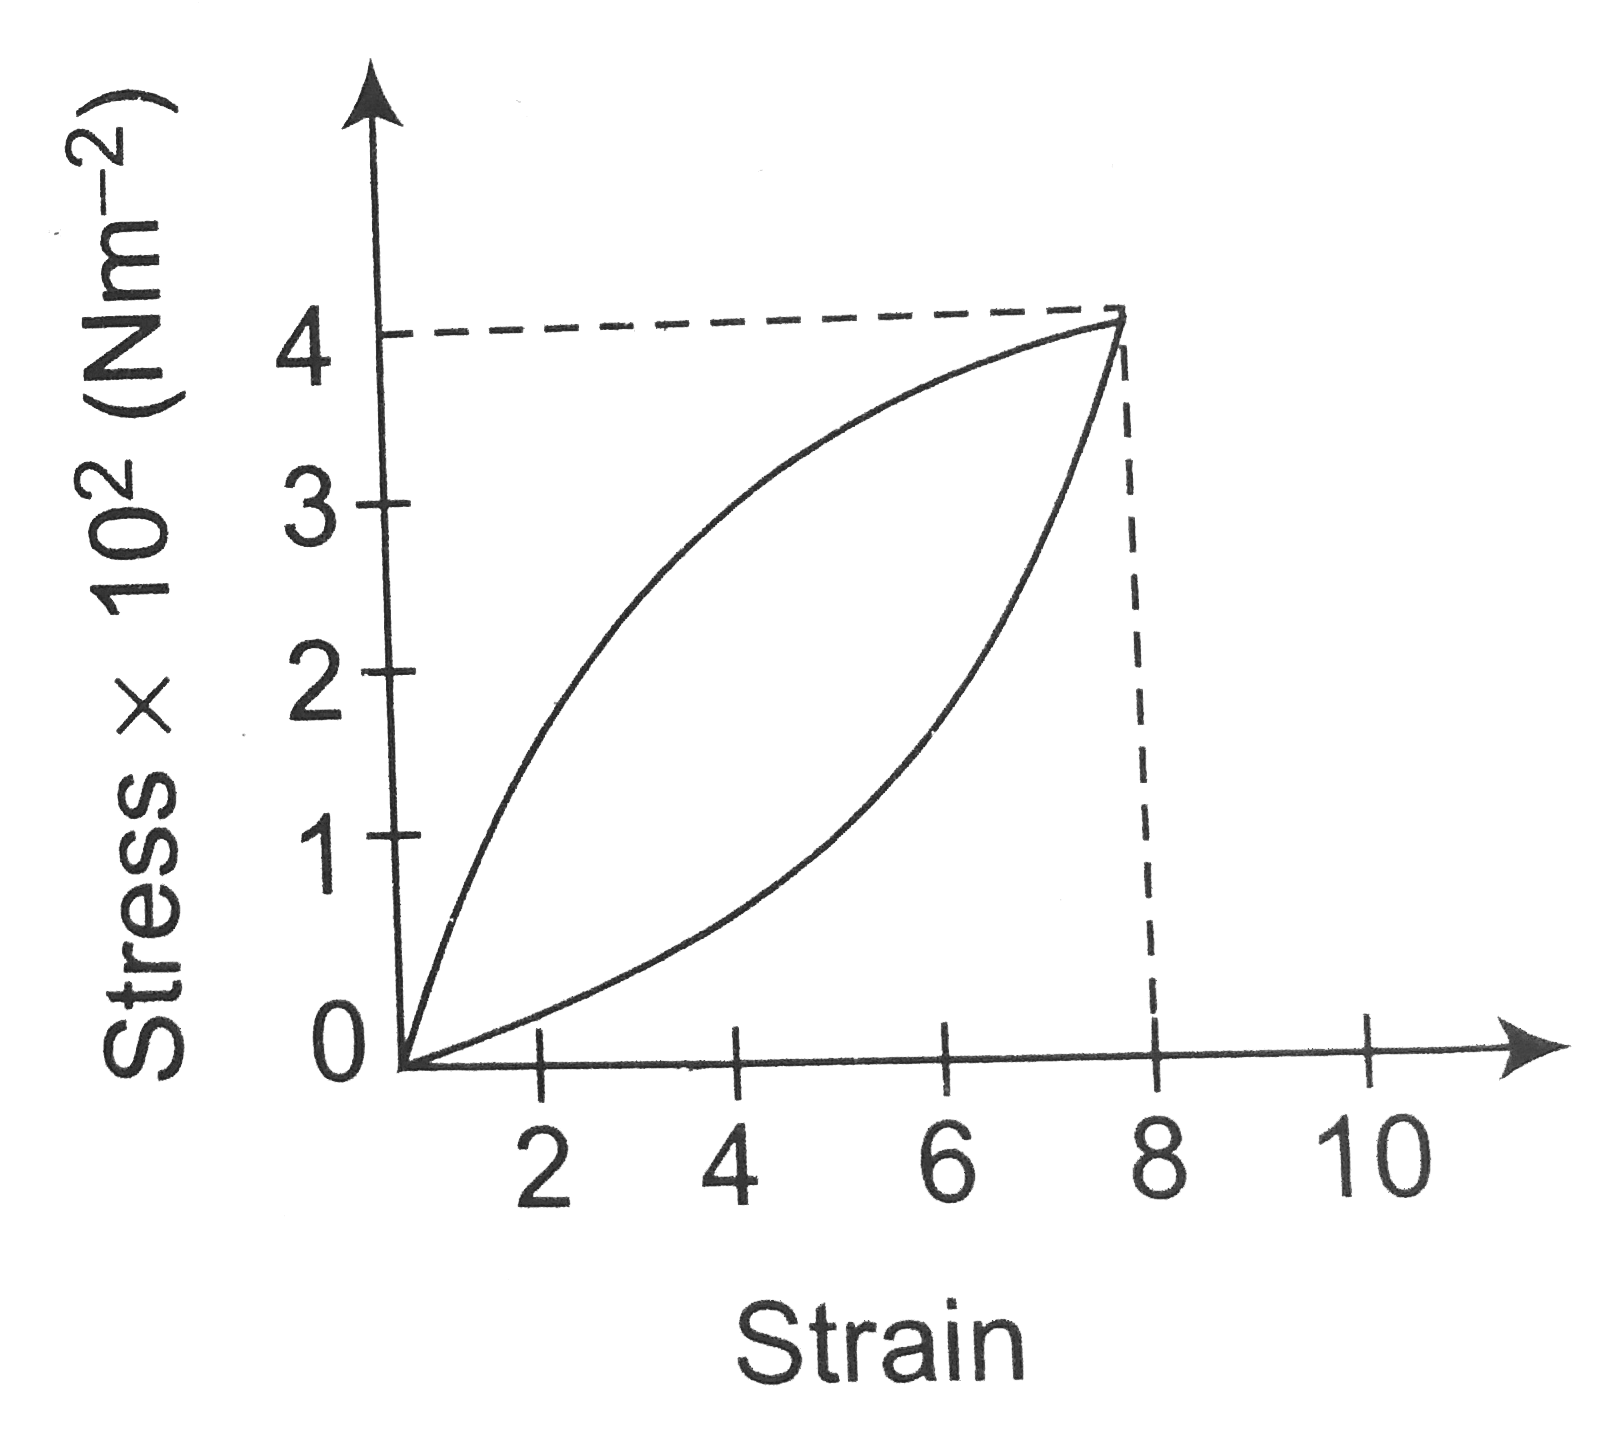 A rubber of volume 2000 cc is alternately subjected to tension and released. The figure shown the stress-strain curve of rubber. Each curve is a quadrant of an ellipse. The amount of energy lost as heat per cycle per unit volume will be